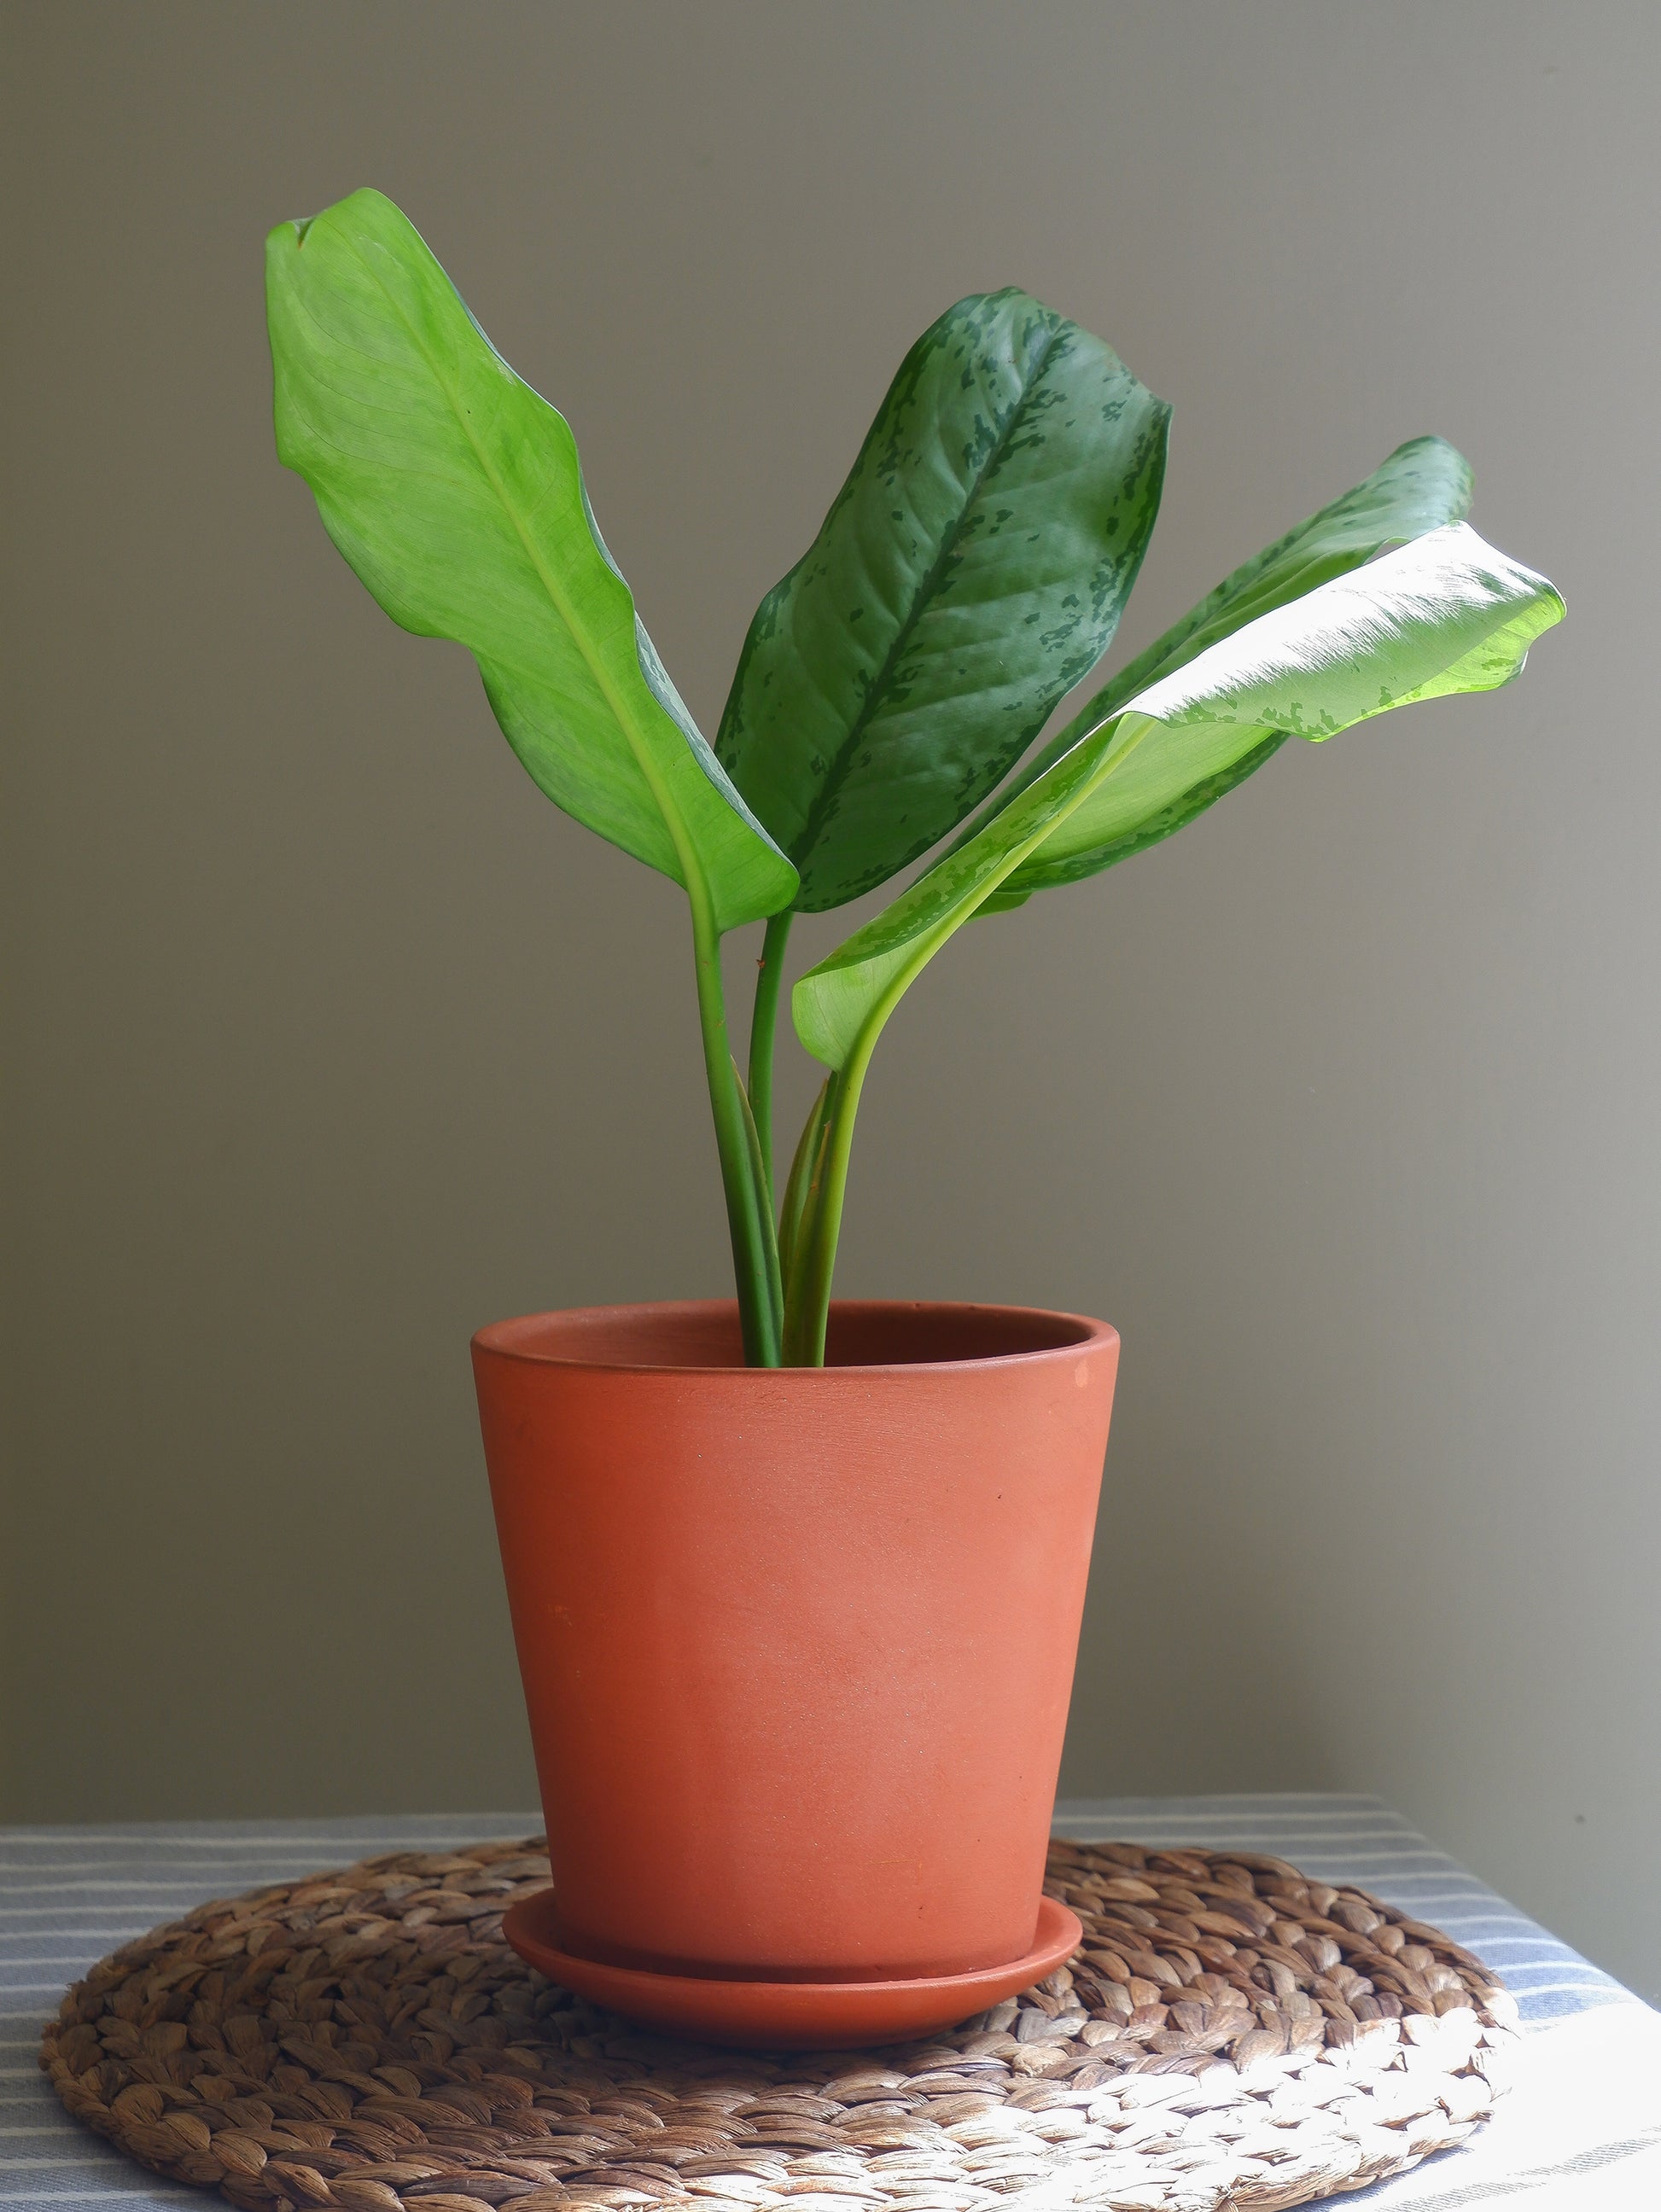 Shop online our 6 inch terracotta pots for indoor plants. Delivered all India